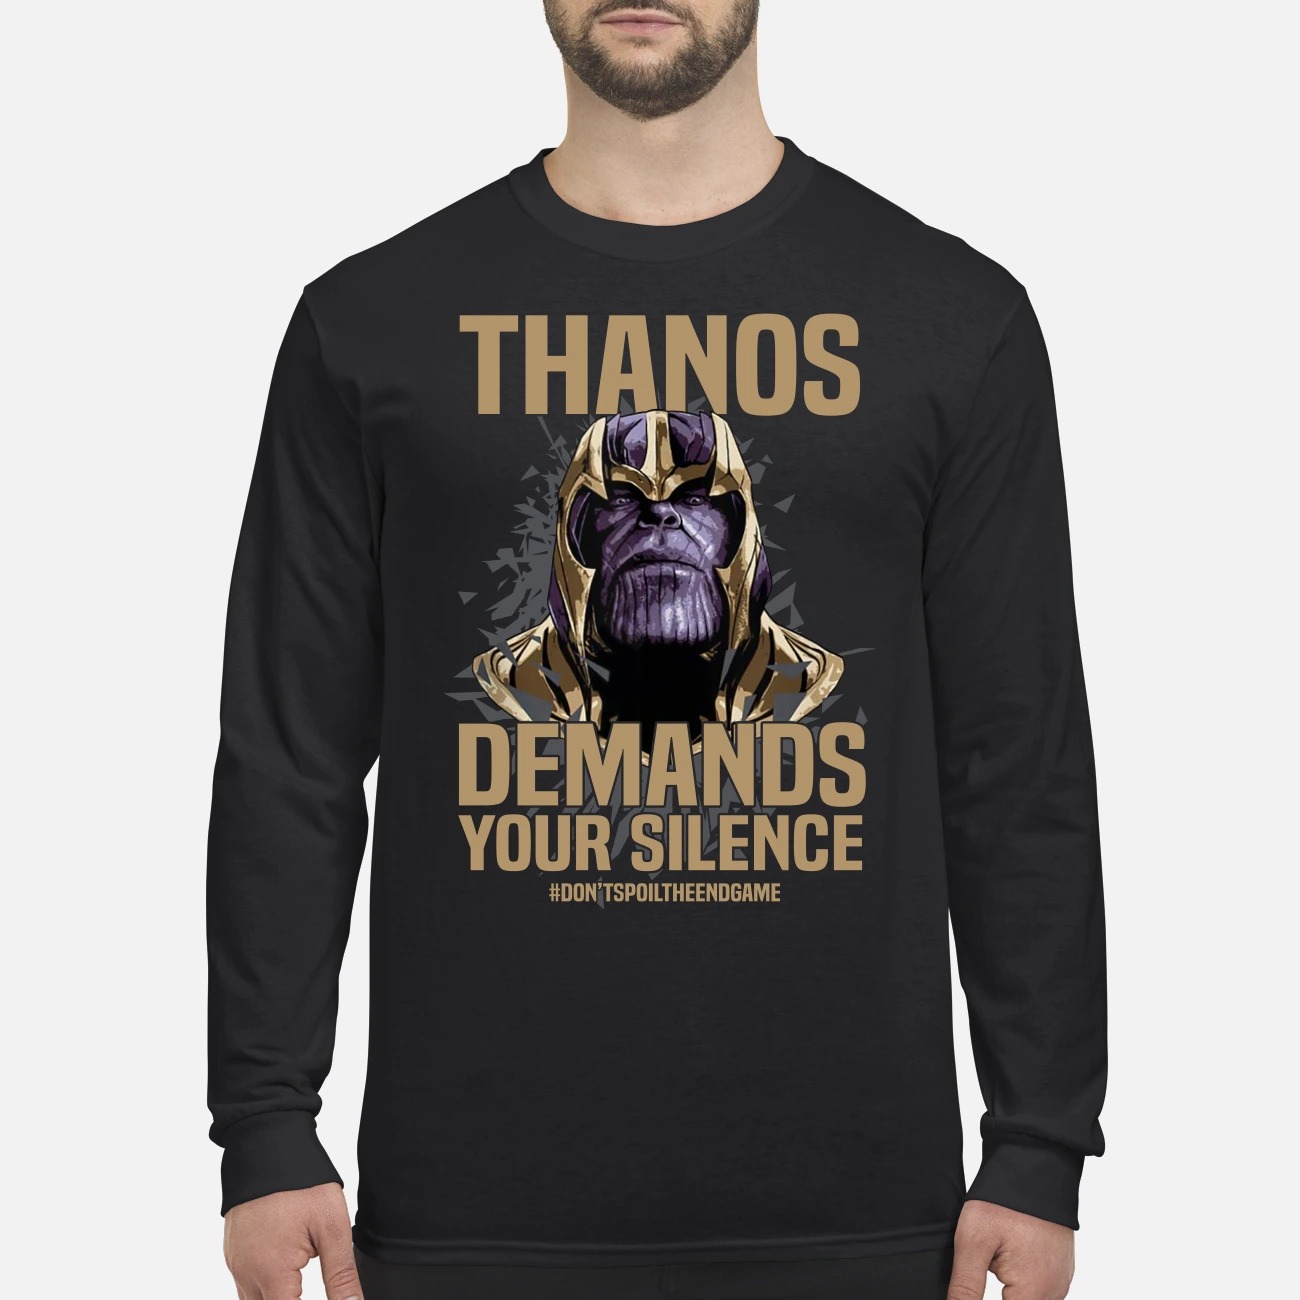 Thanos demands your silence dont spoil the end game men's long sleeved shirt